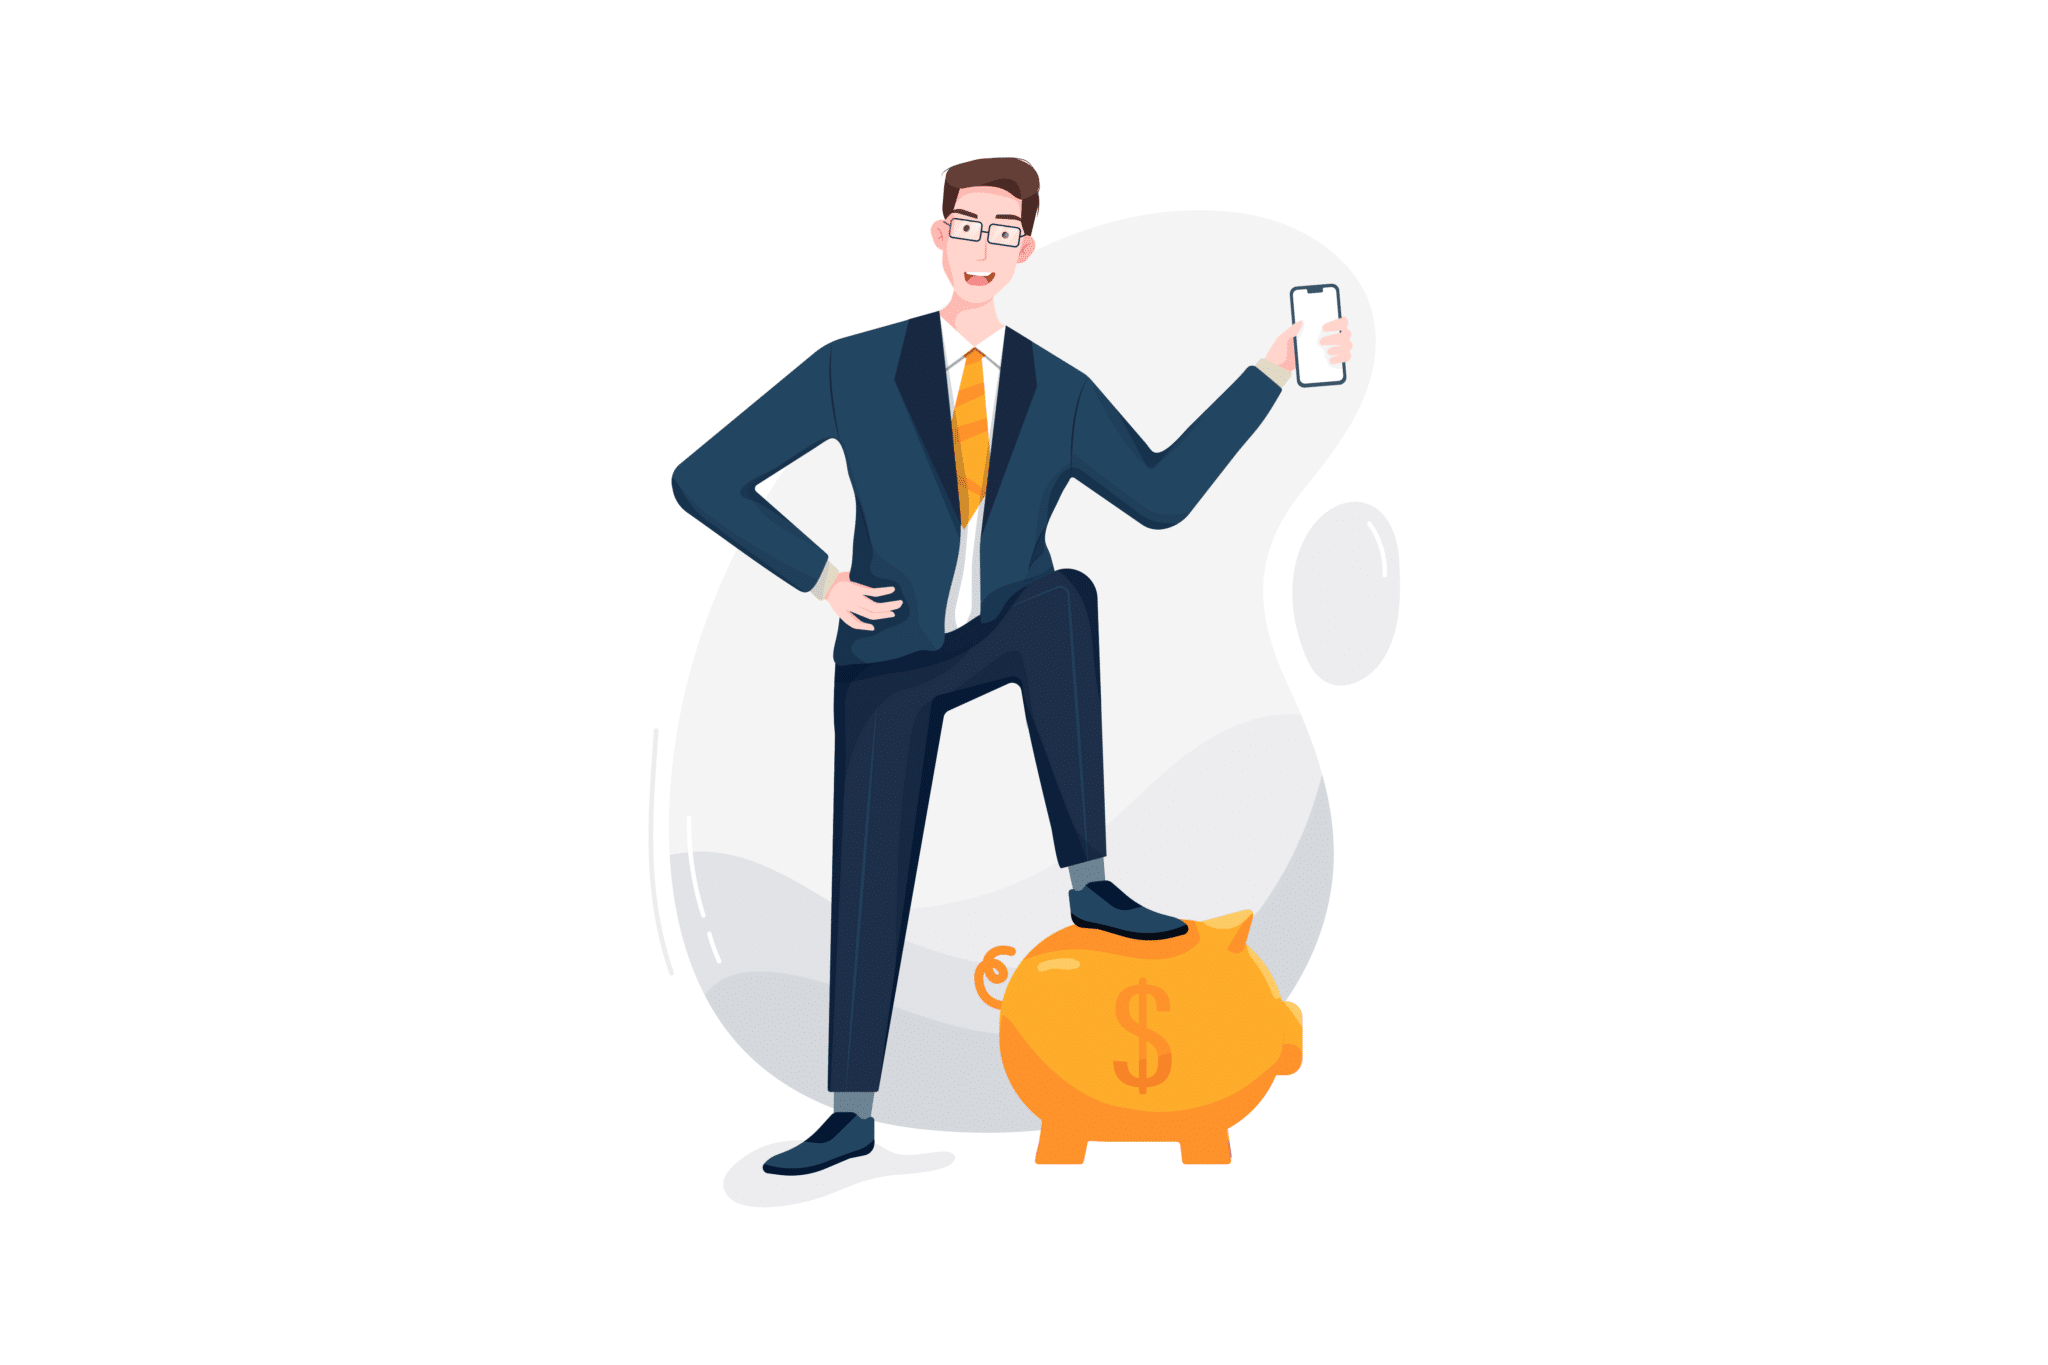 Illustration of man holding a cell phone with one foot on top of a piggy bank.